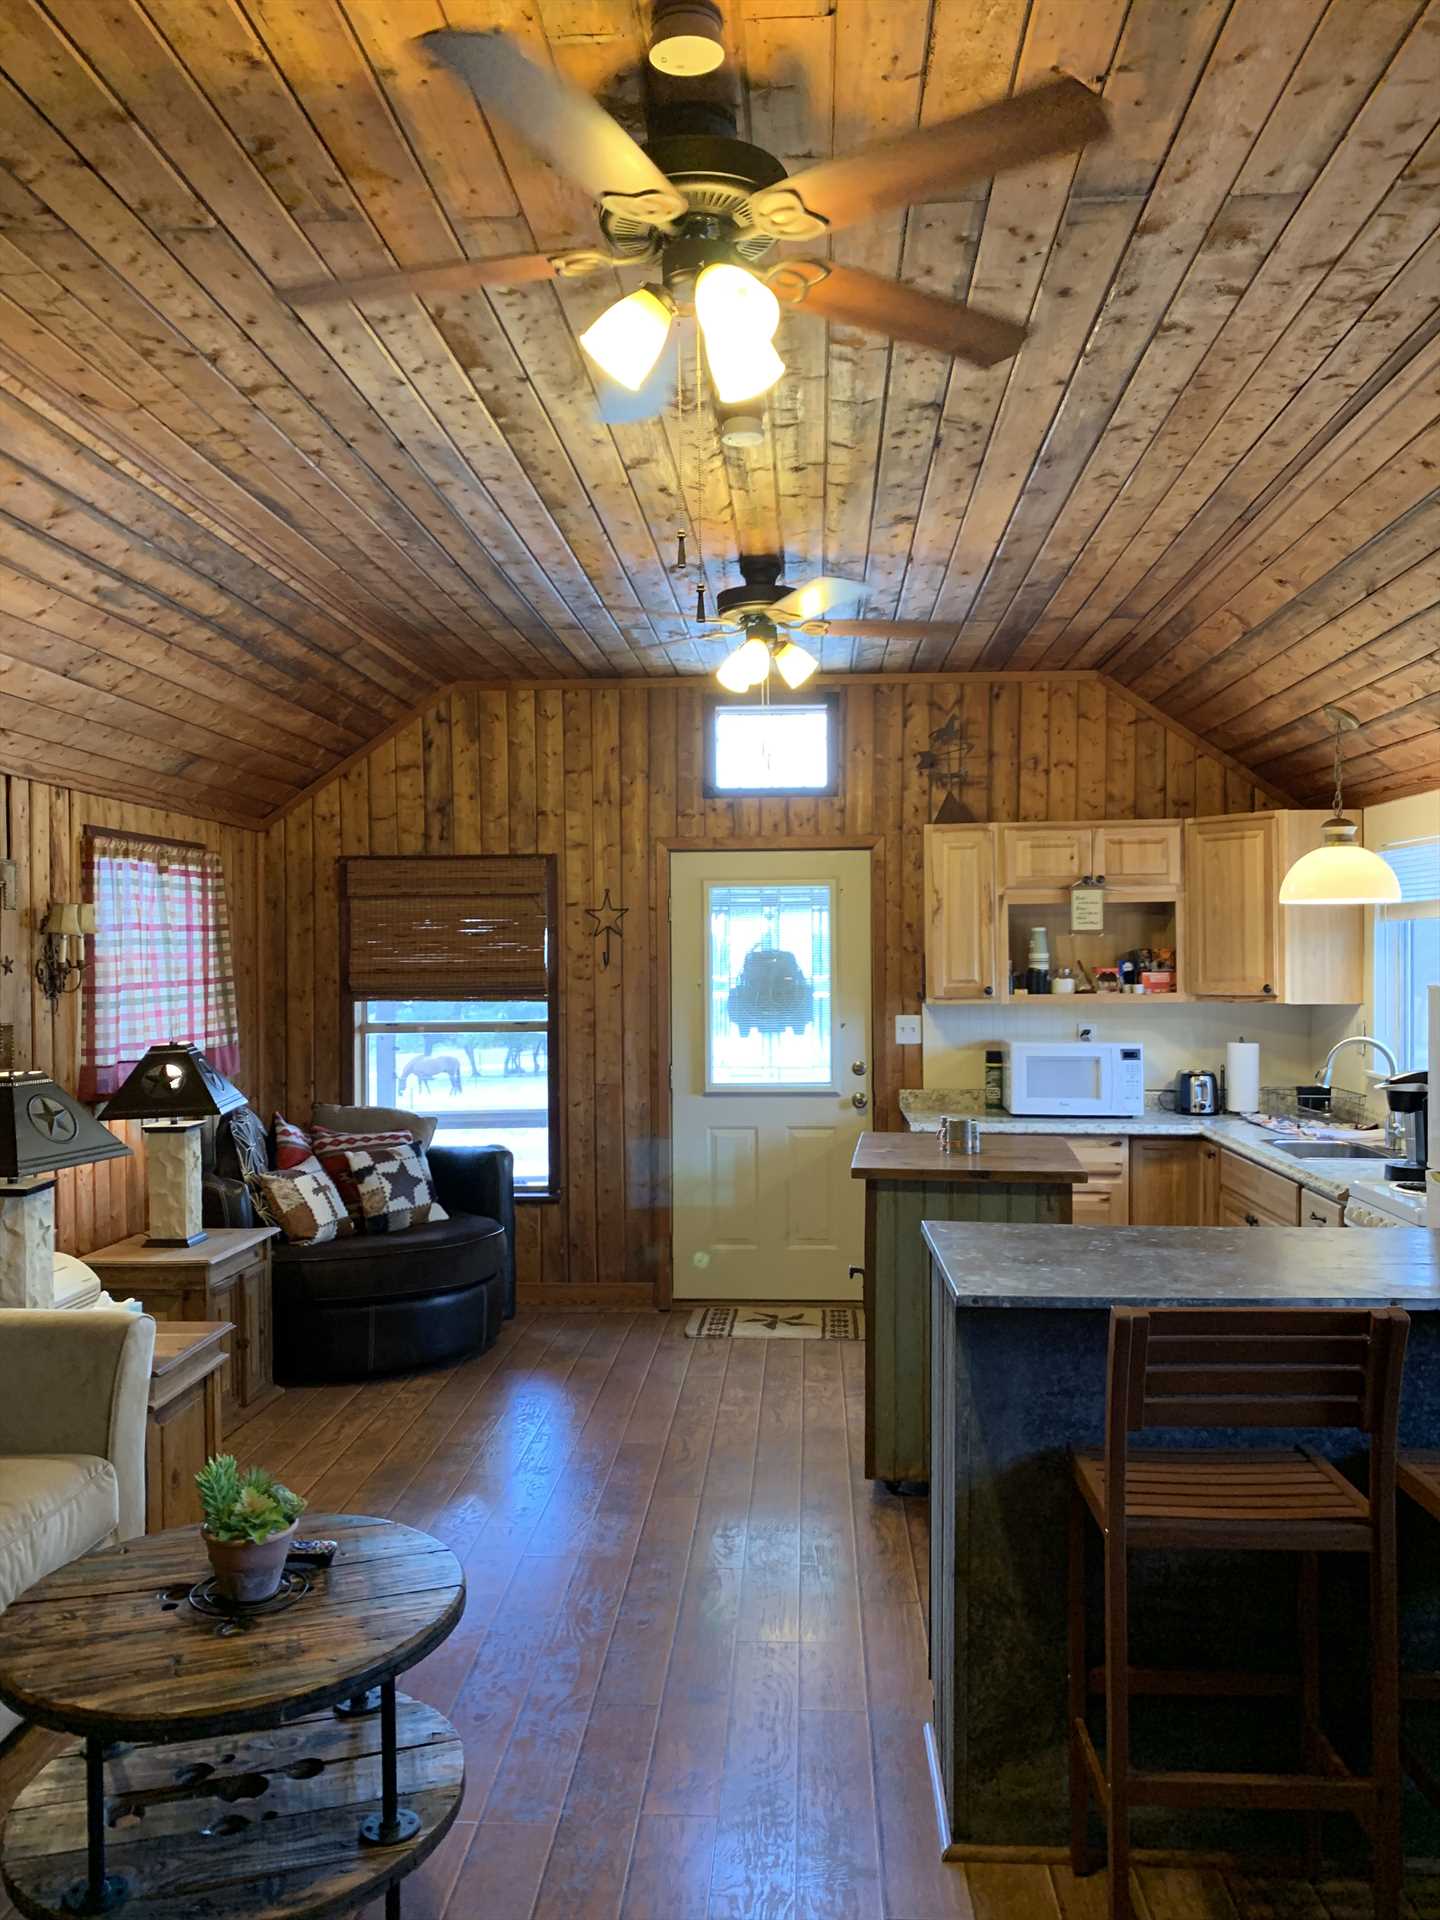                                                 Cable and satellite TV, a DVD player, and shared Wifi on the ranch highlight your tech amenities here.